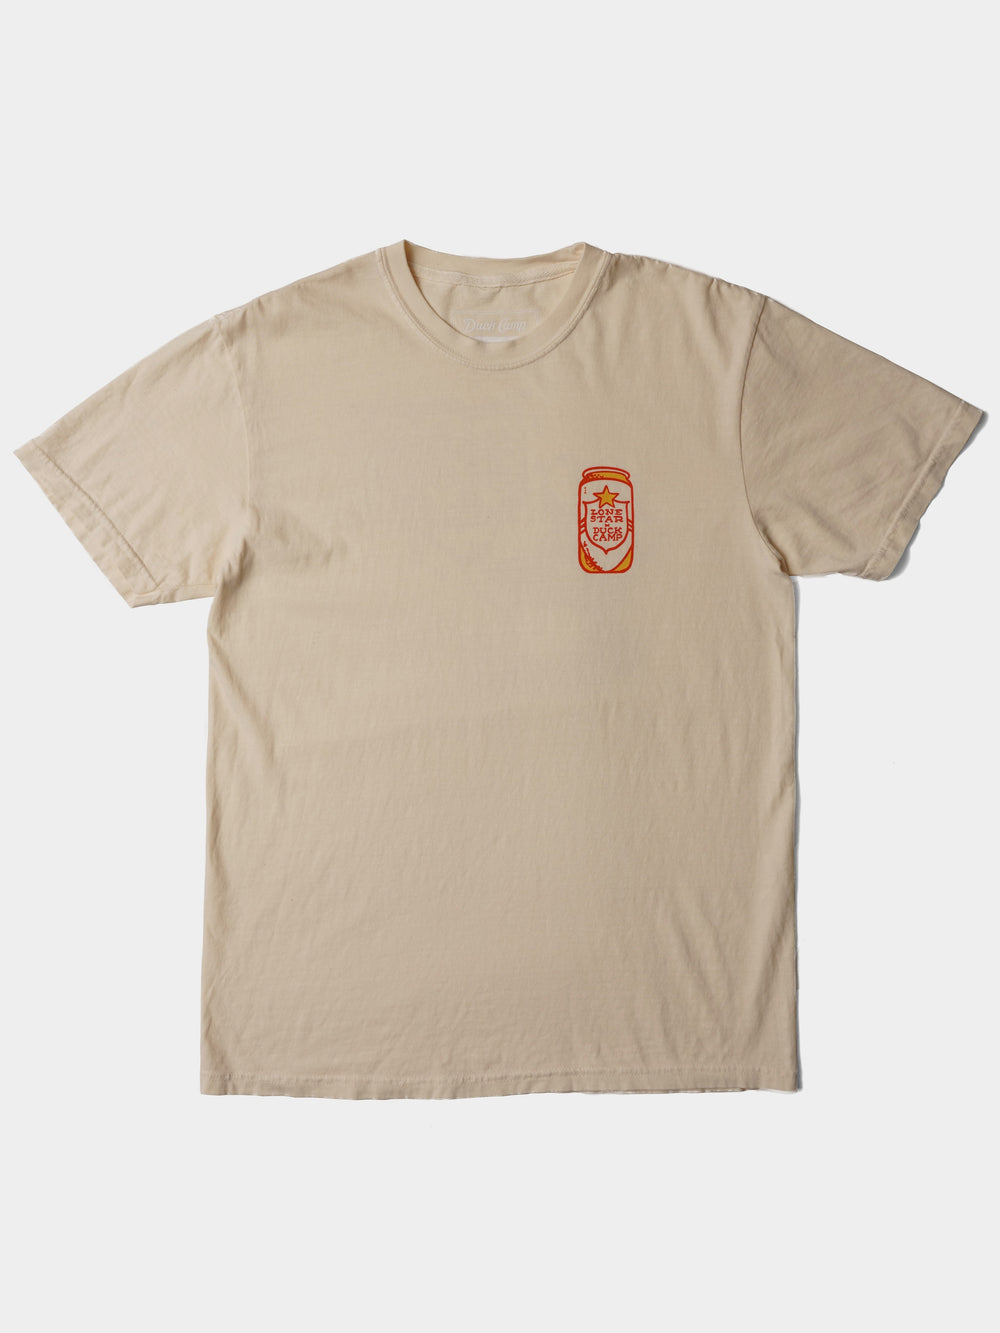 Duck Camp x Lone Star - Order Up T-Shirt